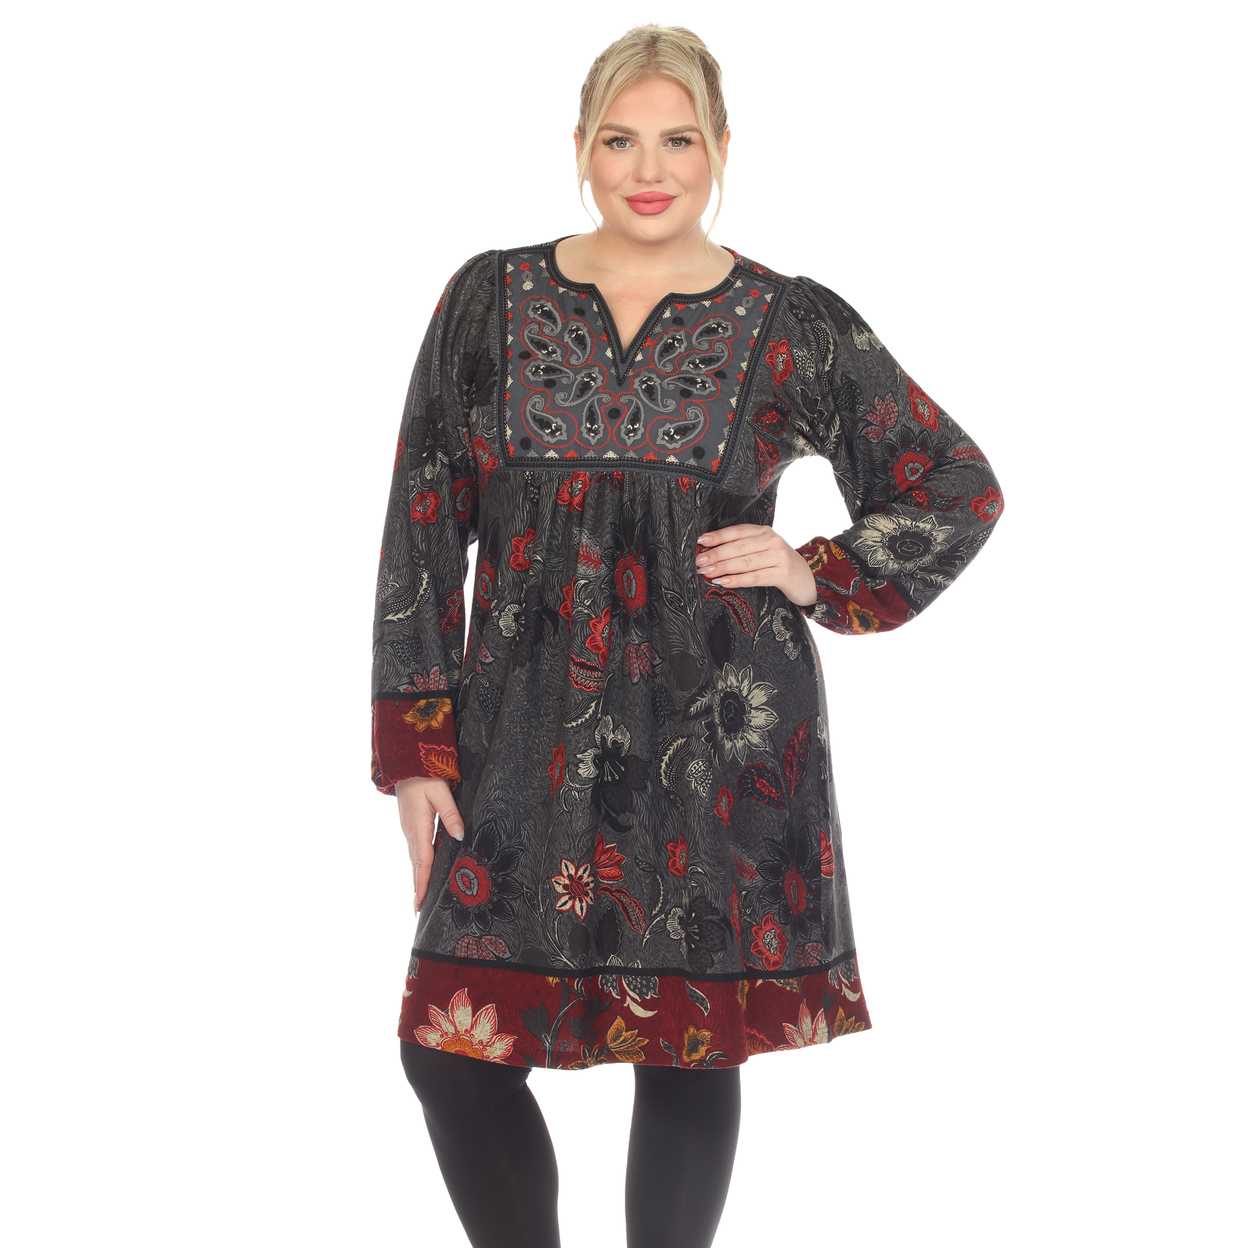 White Mark Women's Floral Paisley Sweater Dress - Grey/red, 2x